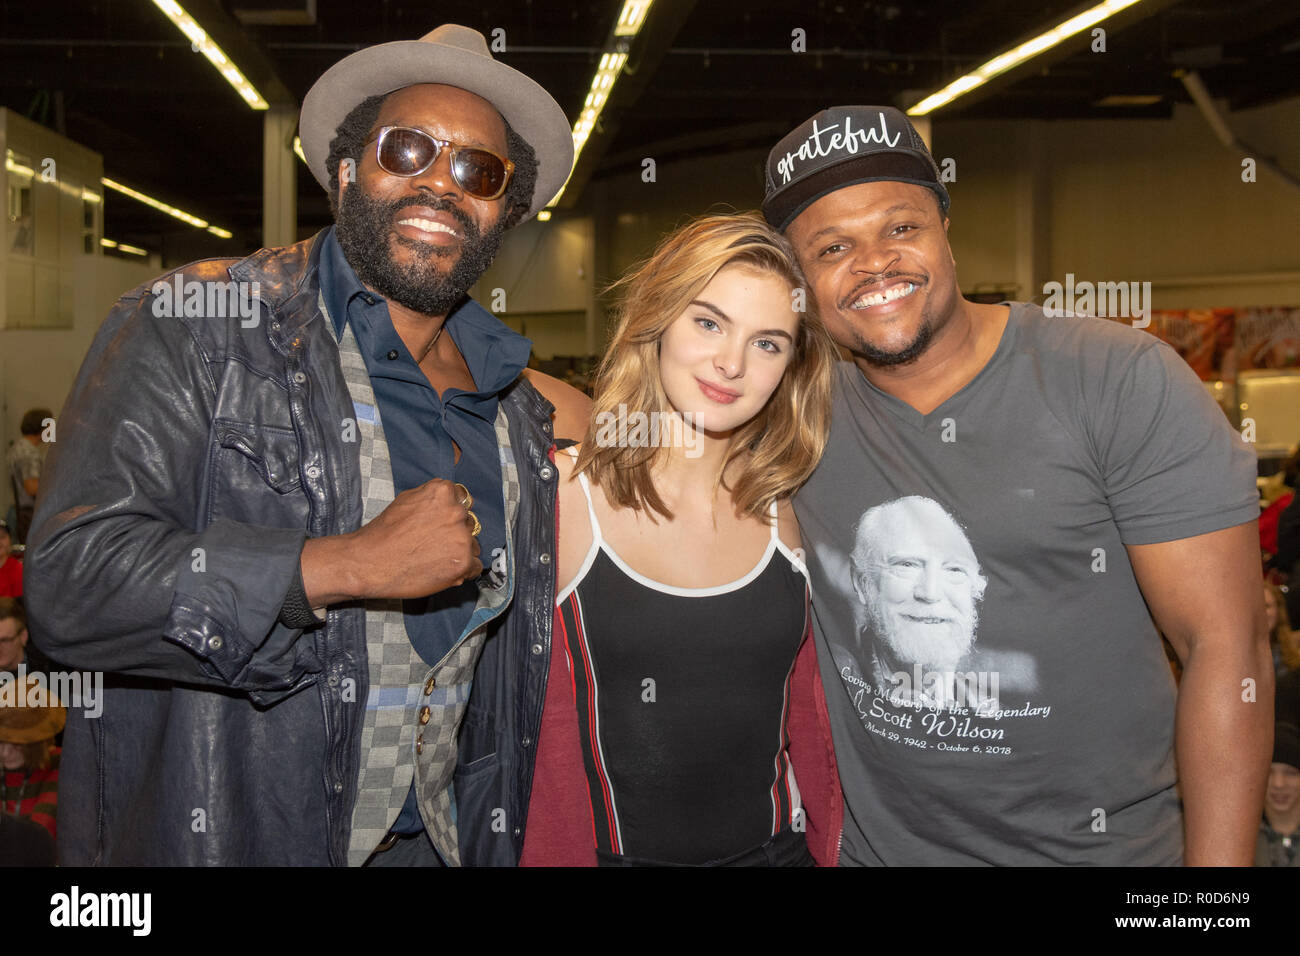 Dortmund, Germany. 3rd November, 2018. Chad L. Coleman, Brighton Sharbino and IronE Singleton at Weekend of Hell 2018, a two day (November 3-4 2018) horror-themed fan convention. Credit: Markus Wissmann/Alamy Live News Stock Photo